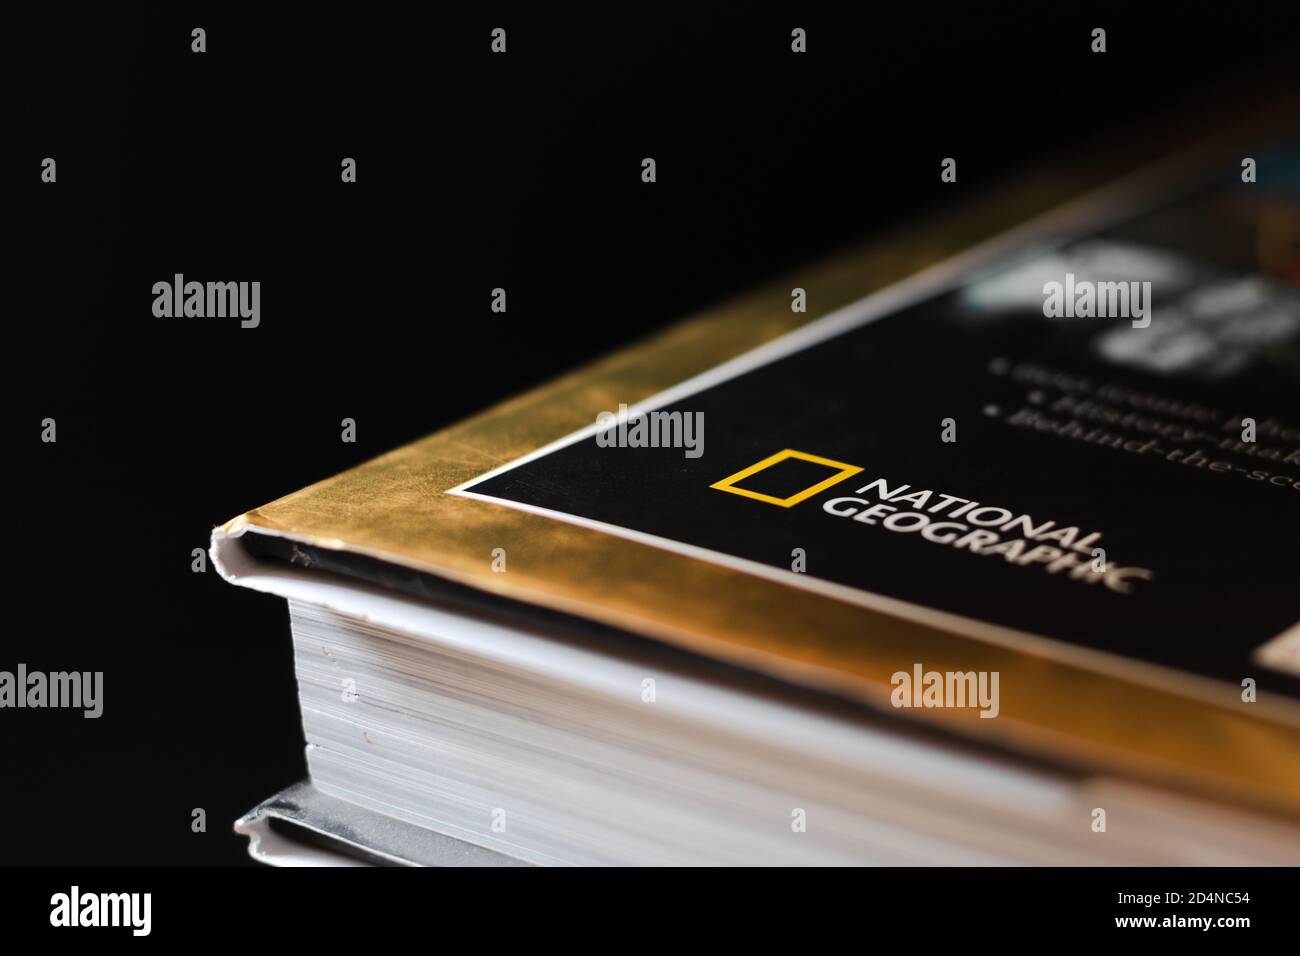 National Geographic logo on a book Stock Photo